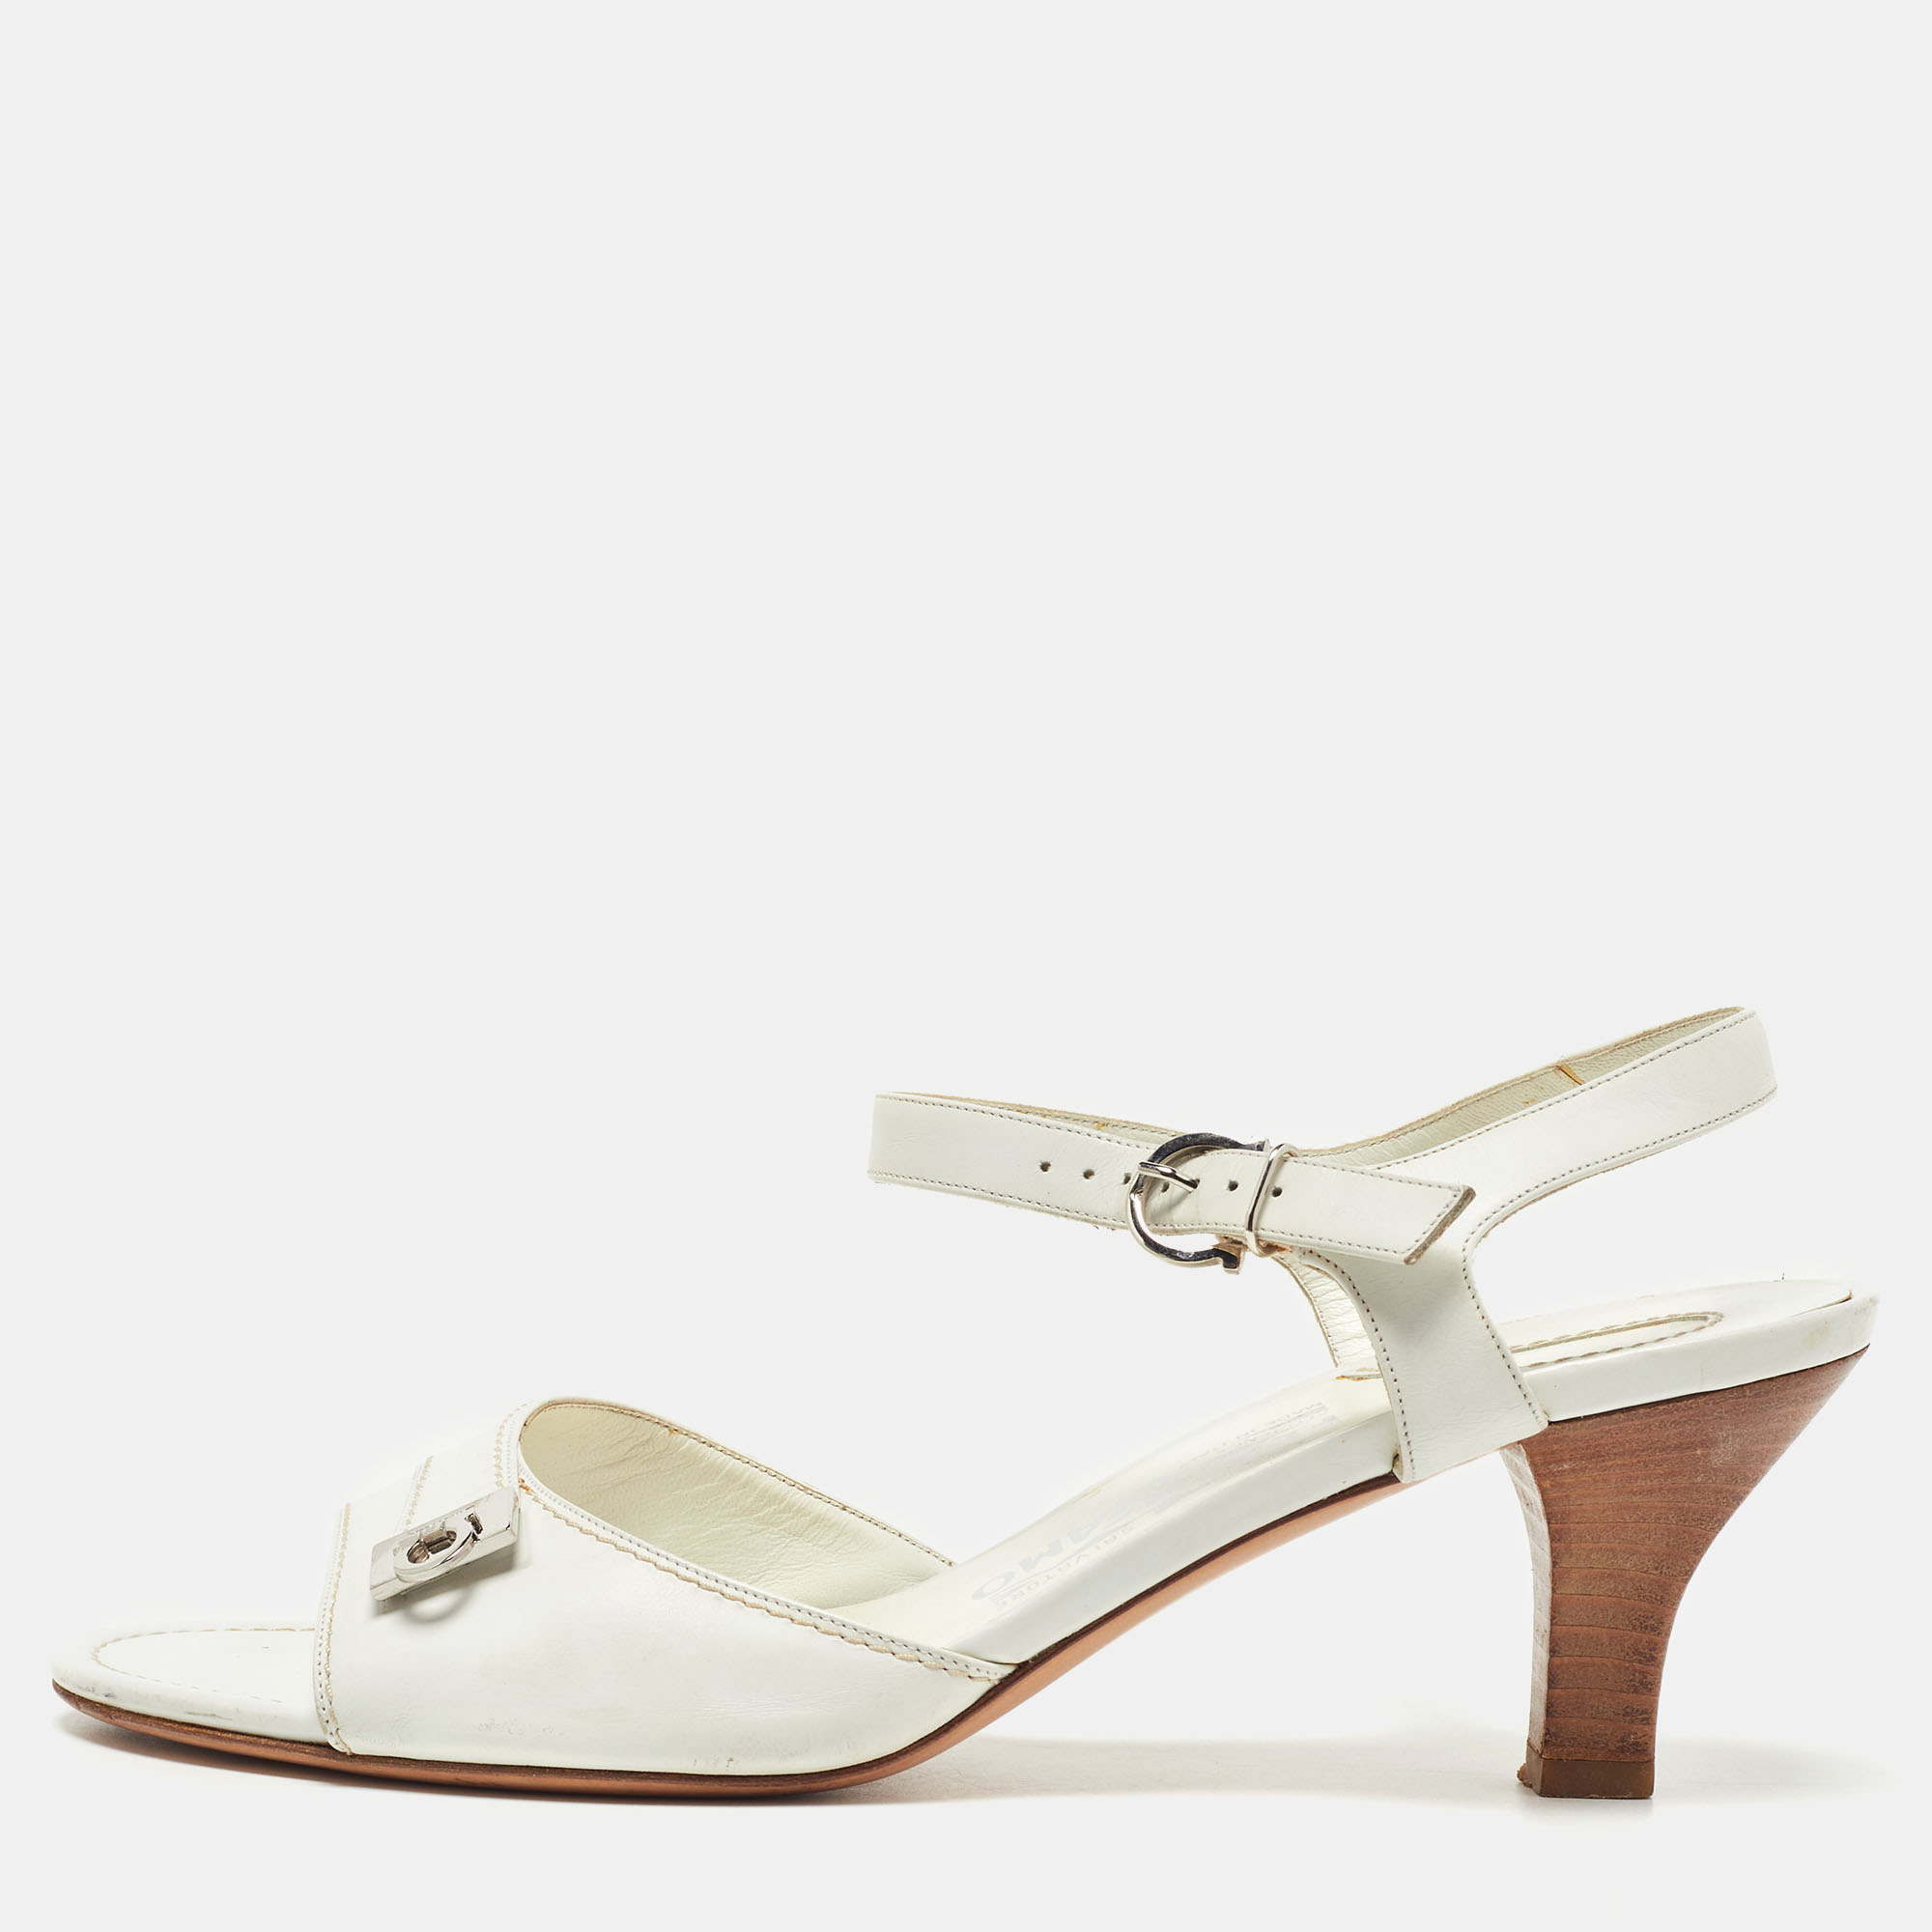 Pre-owned Ferragamo White Leather Ankle Strap Sandals Size 39